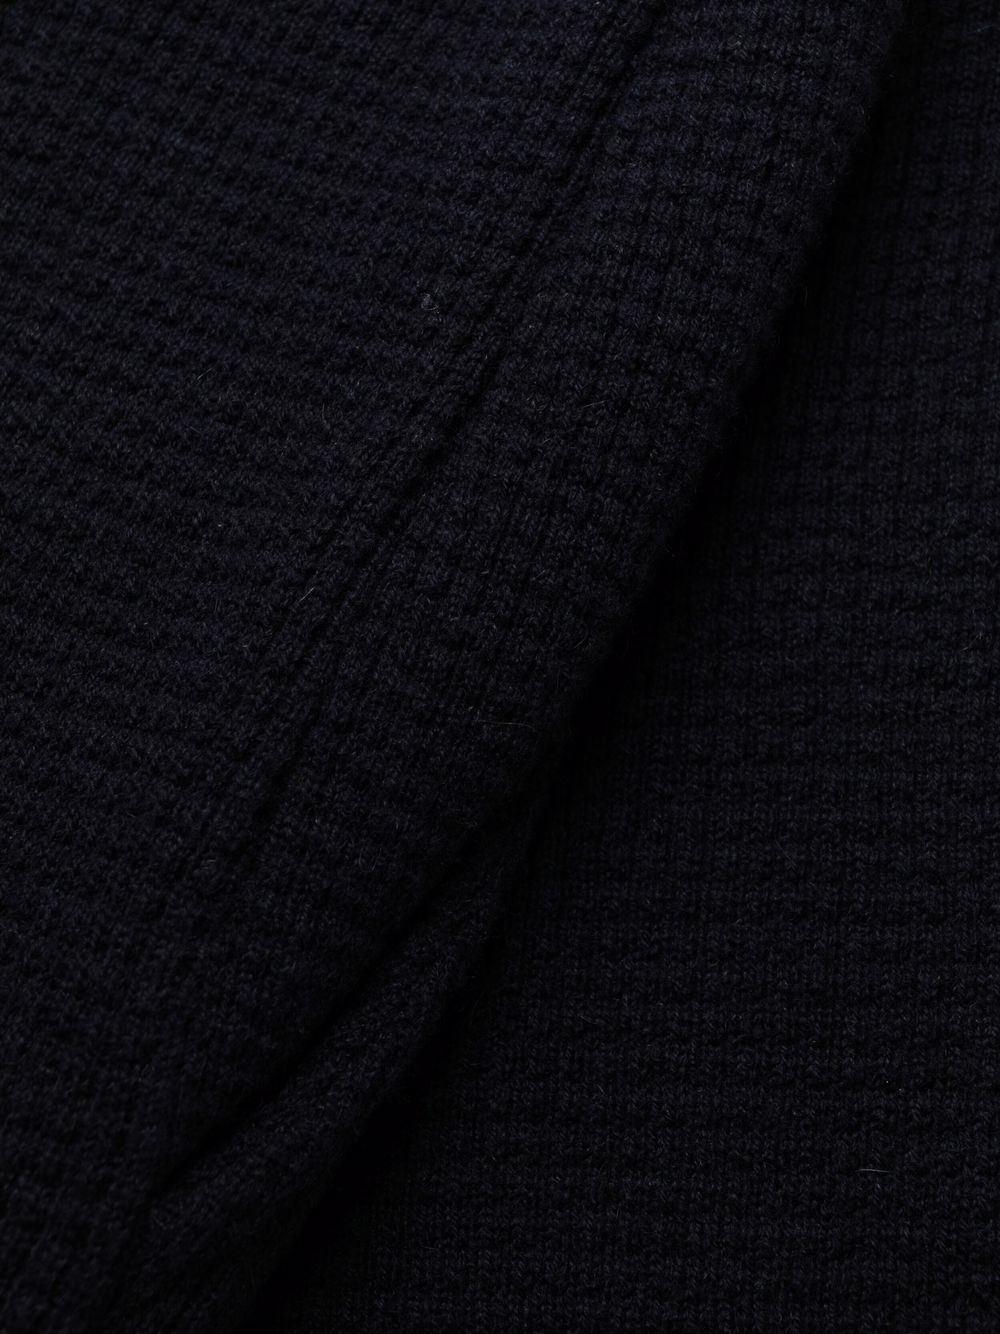 SWEATPANTS IN CASHMERE WOOL WAFFLE W/ ENG 4 BAR NAVY3